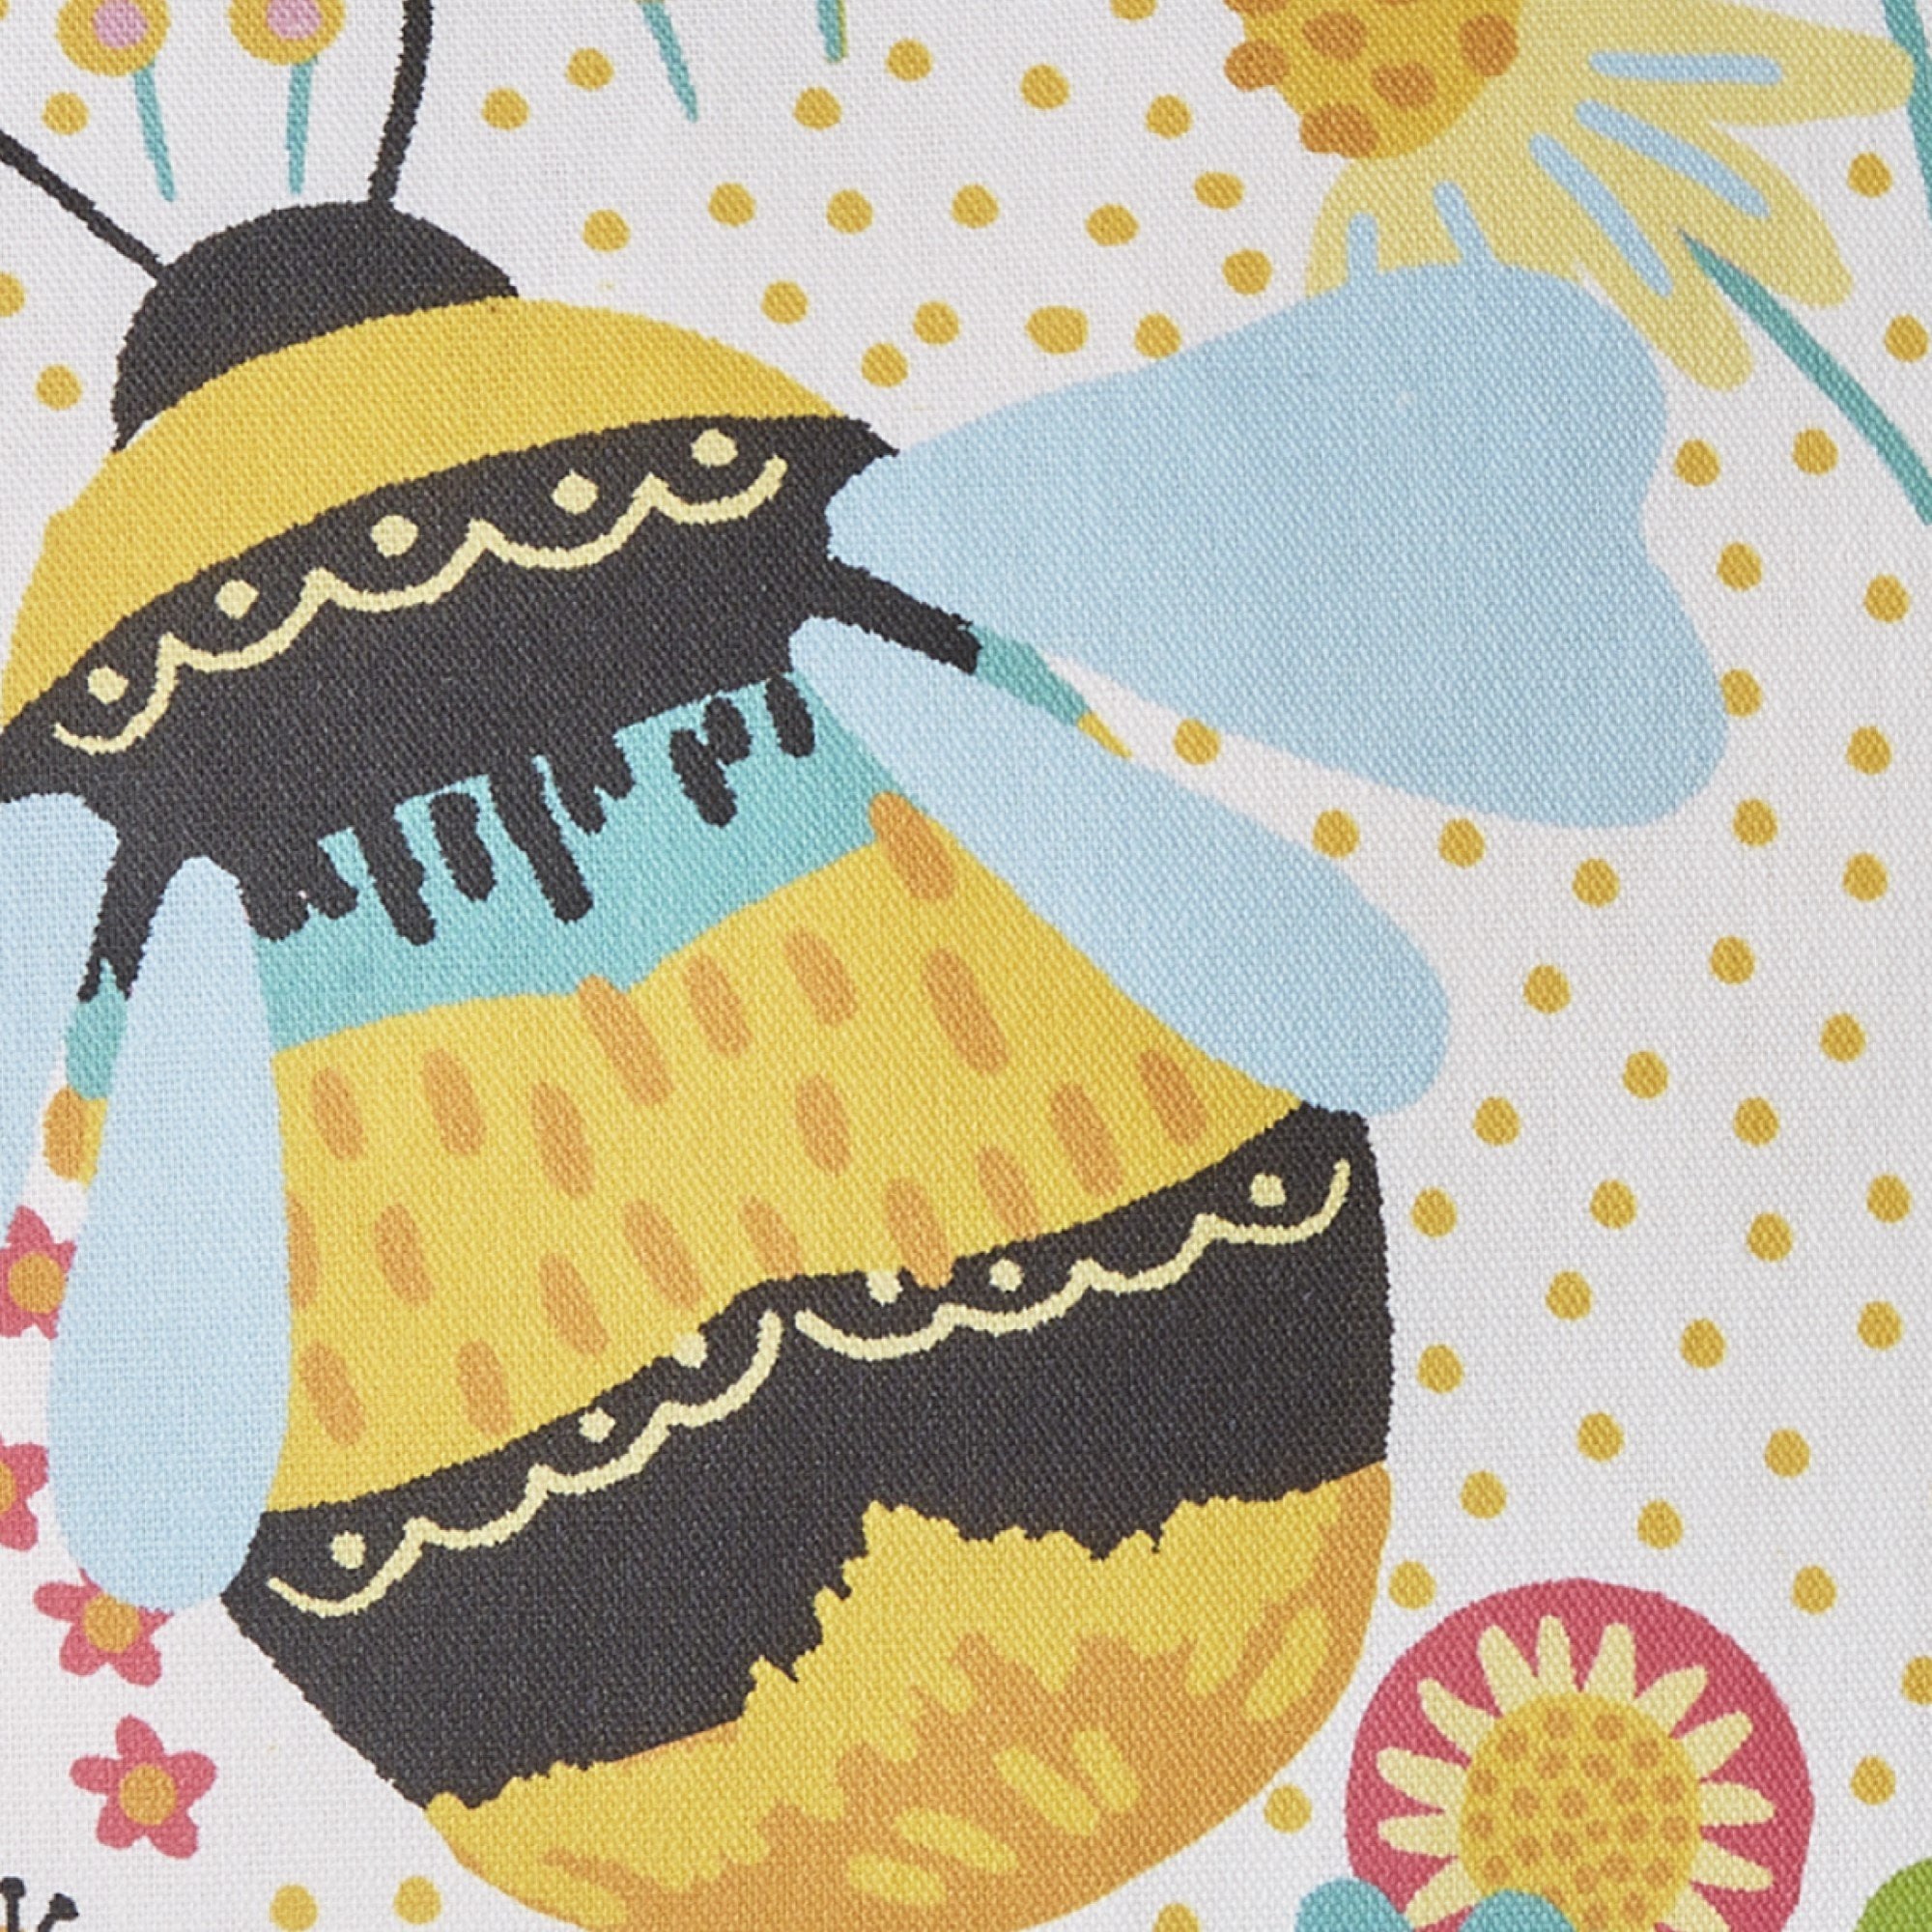 Picnic Blanket Buzzy Bee by Fusion in Ochre